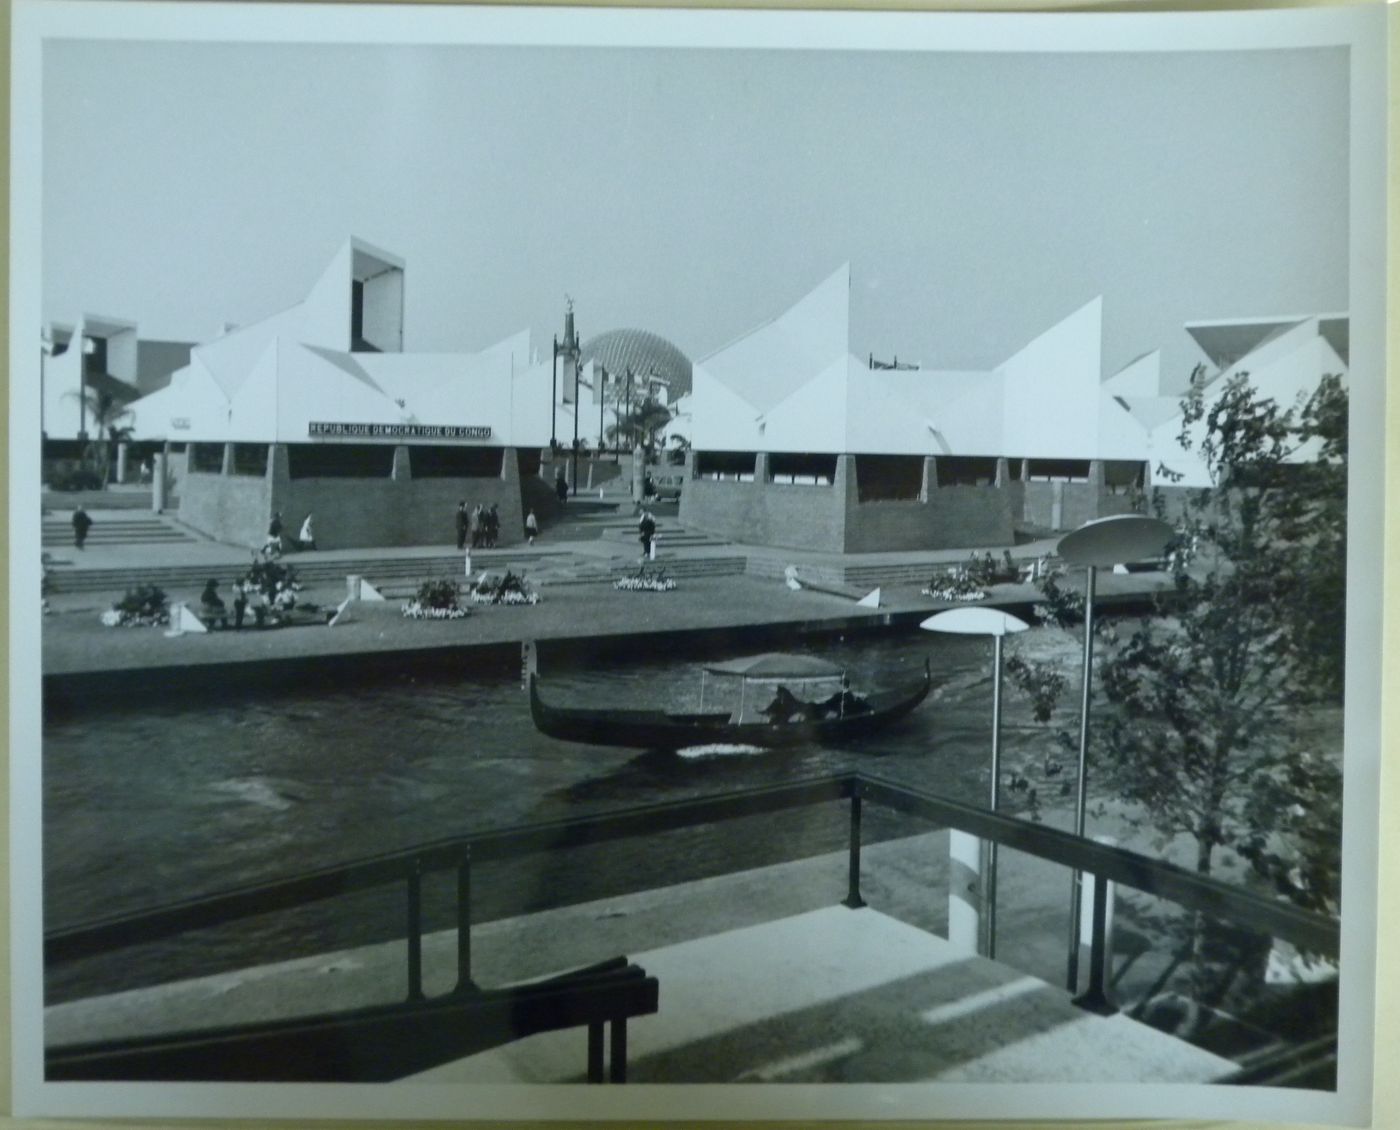 Partial view of the Africa place and the Democratic Republic of the Congo Pavilion with a gondola in foreground, Expo 67, Montréal, Québec